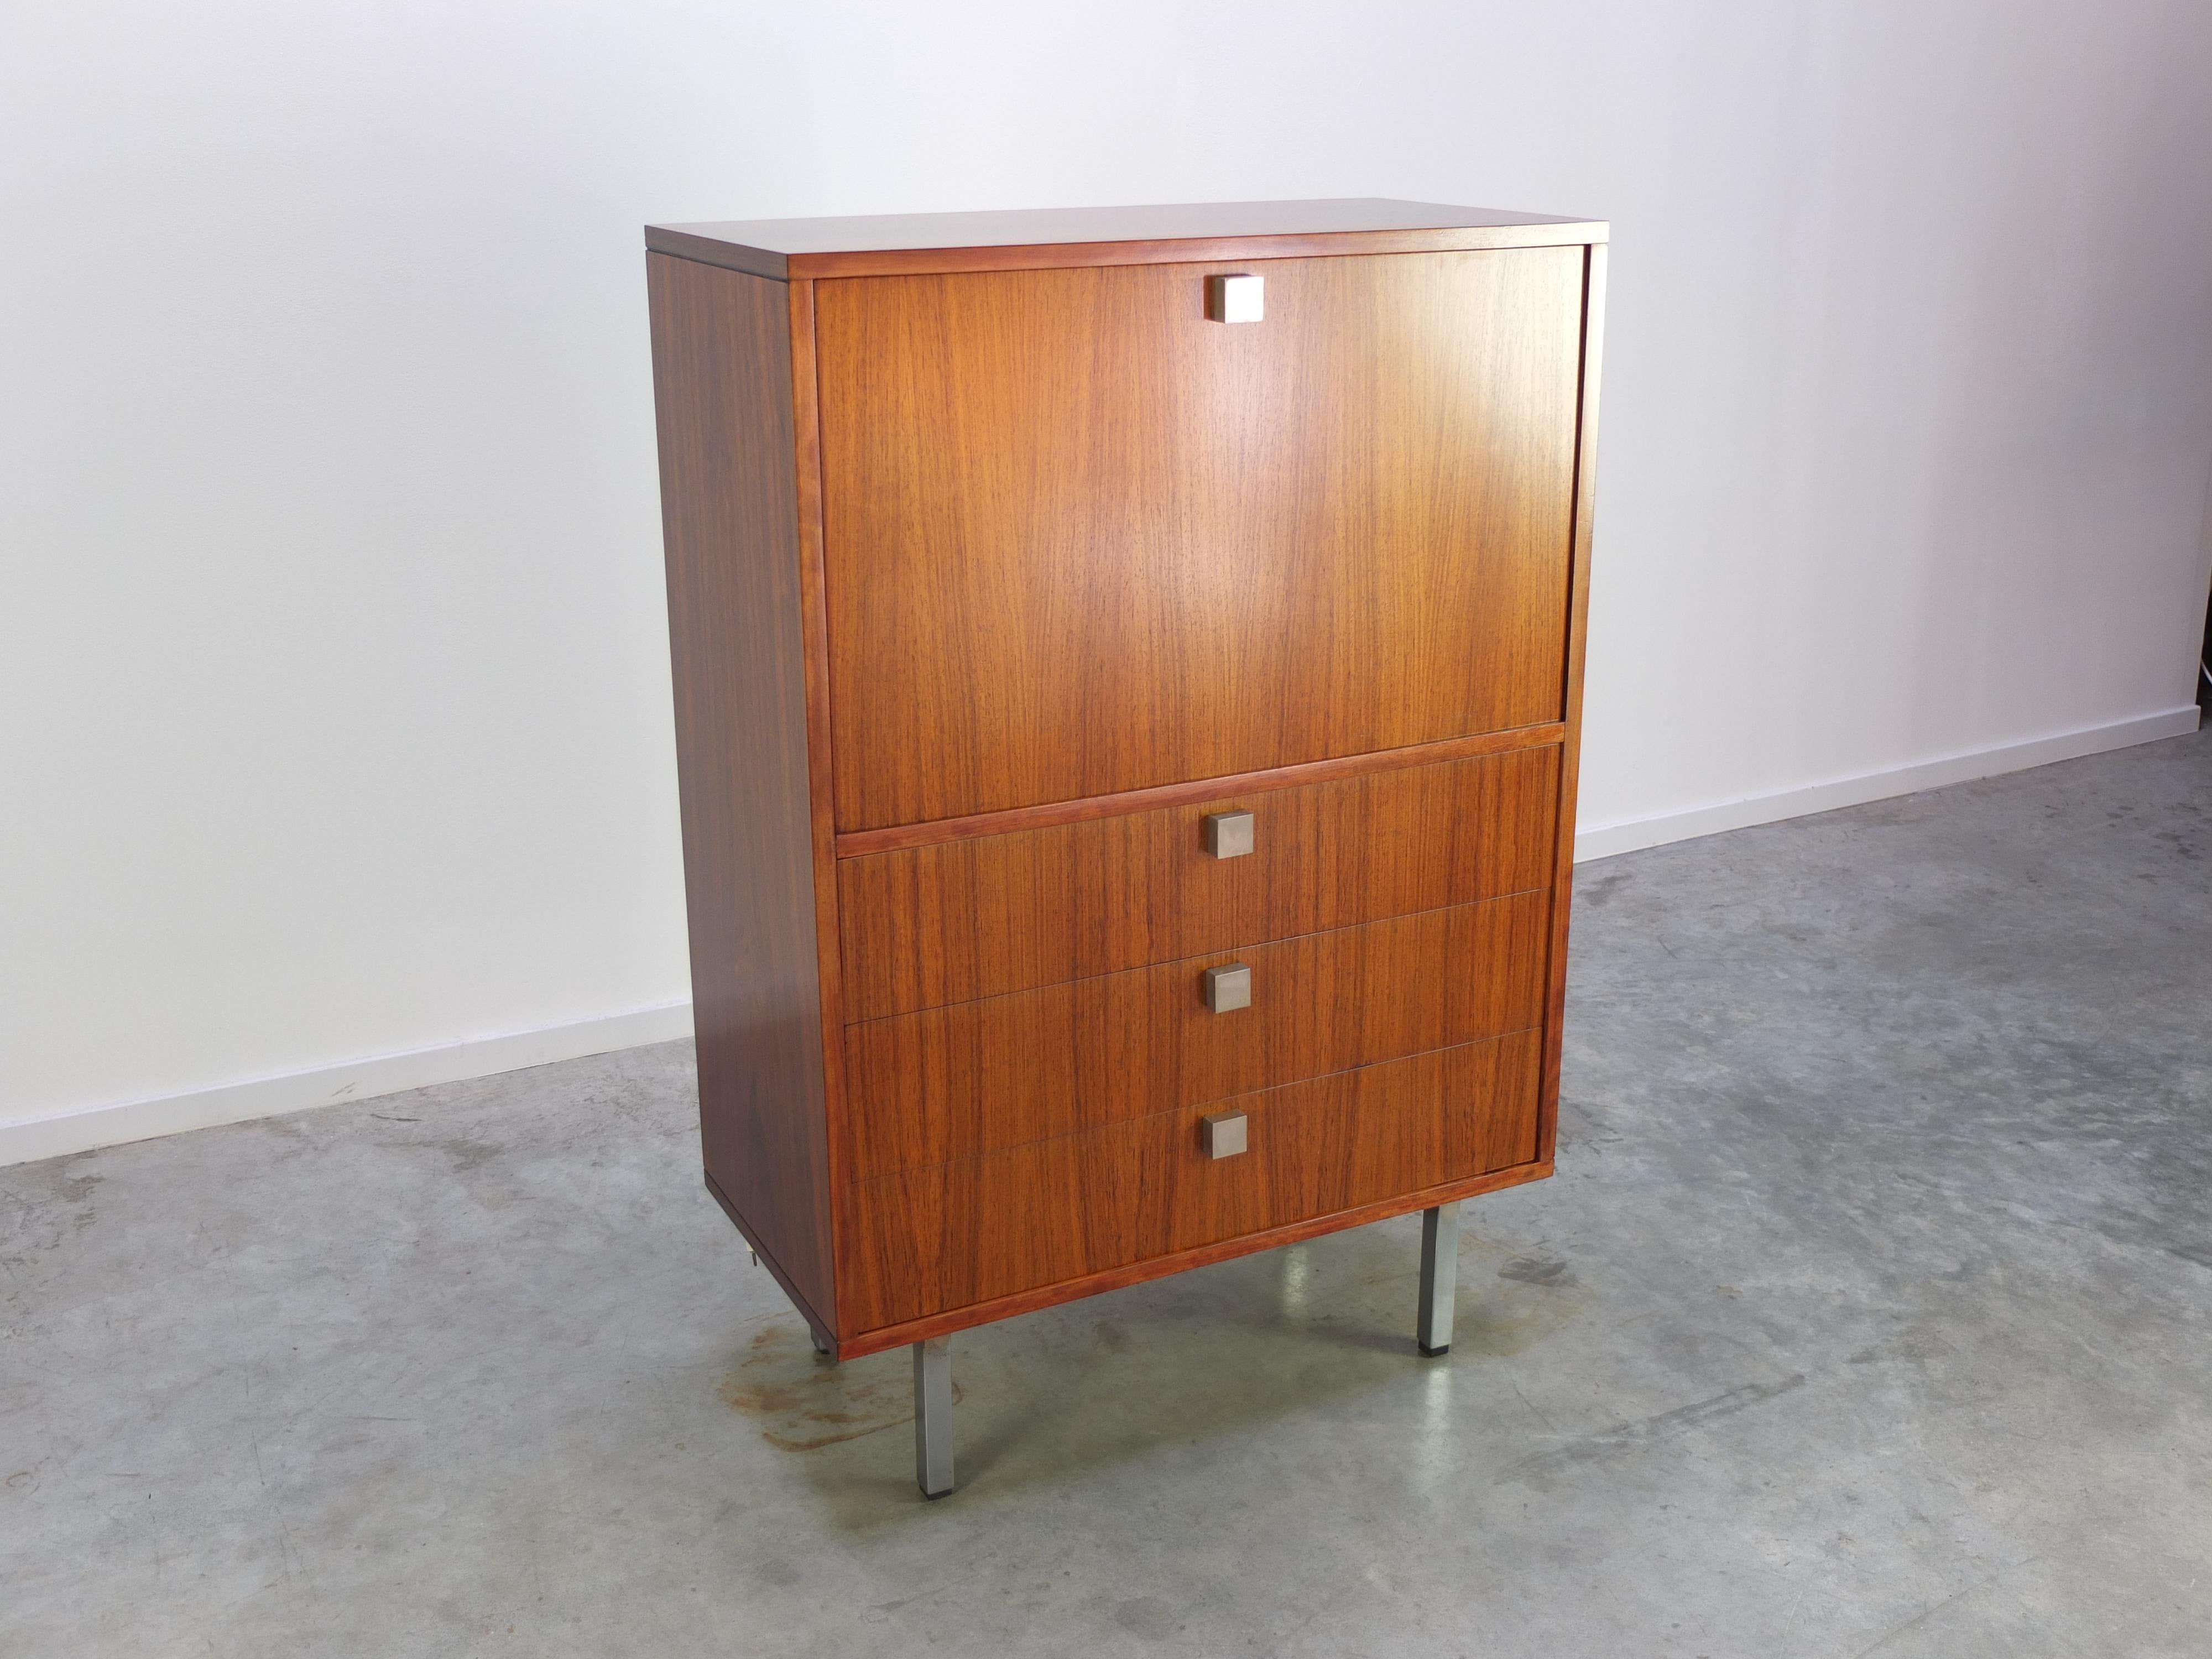 Lovely bar cabinet designed by Belgian modernist designer Alfred Hendrickx for Belform, 1960s. Made of rosewood with a fantastic decorative woodgrain and metal feet. The large door opens an illuminated bar compartment. Underneath we find three large